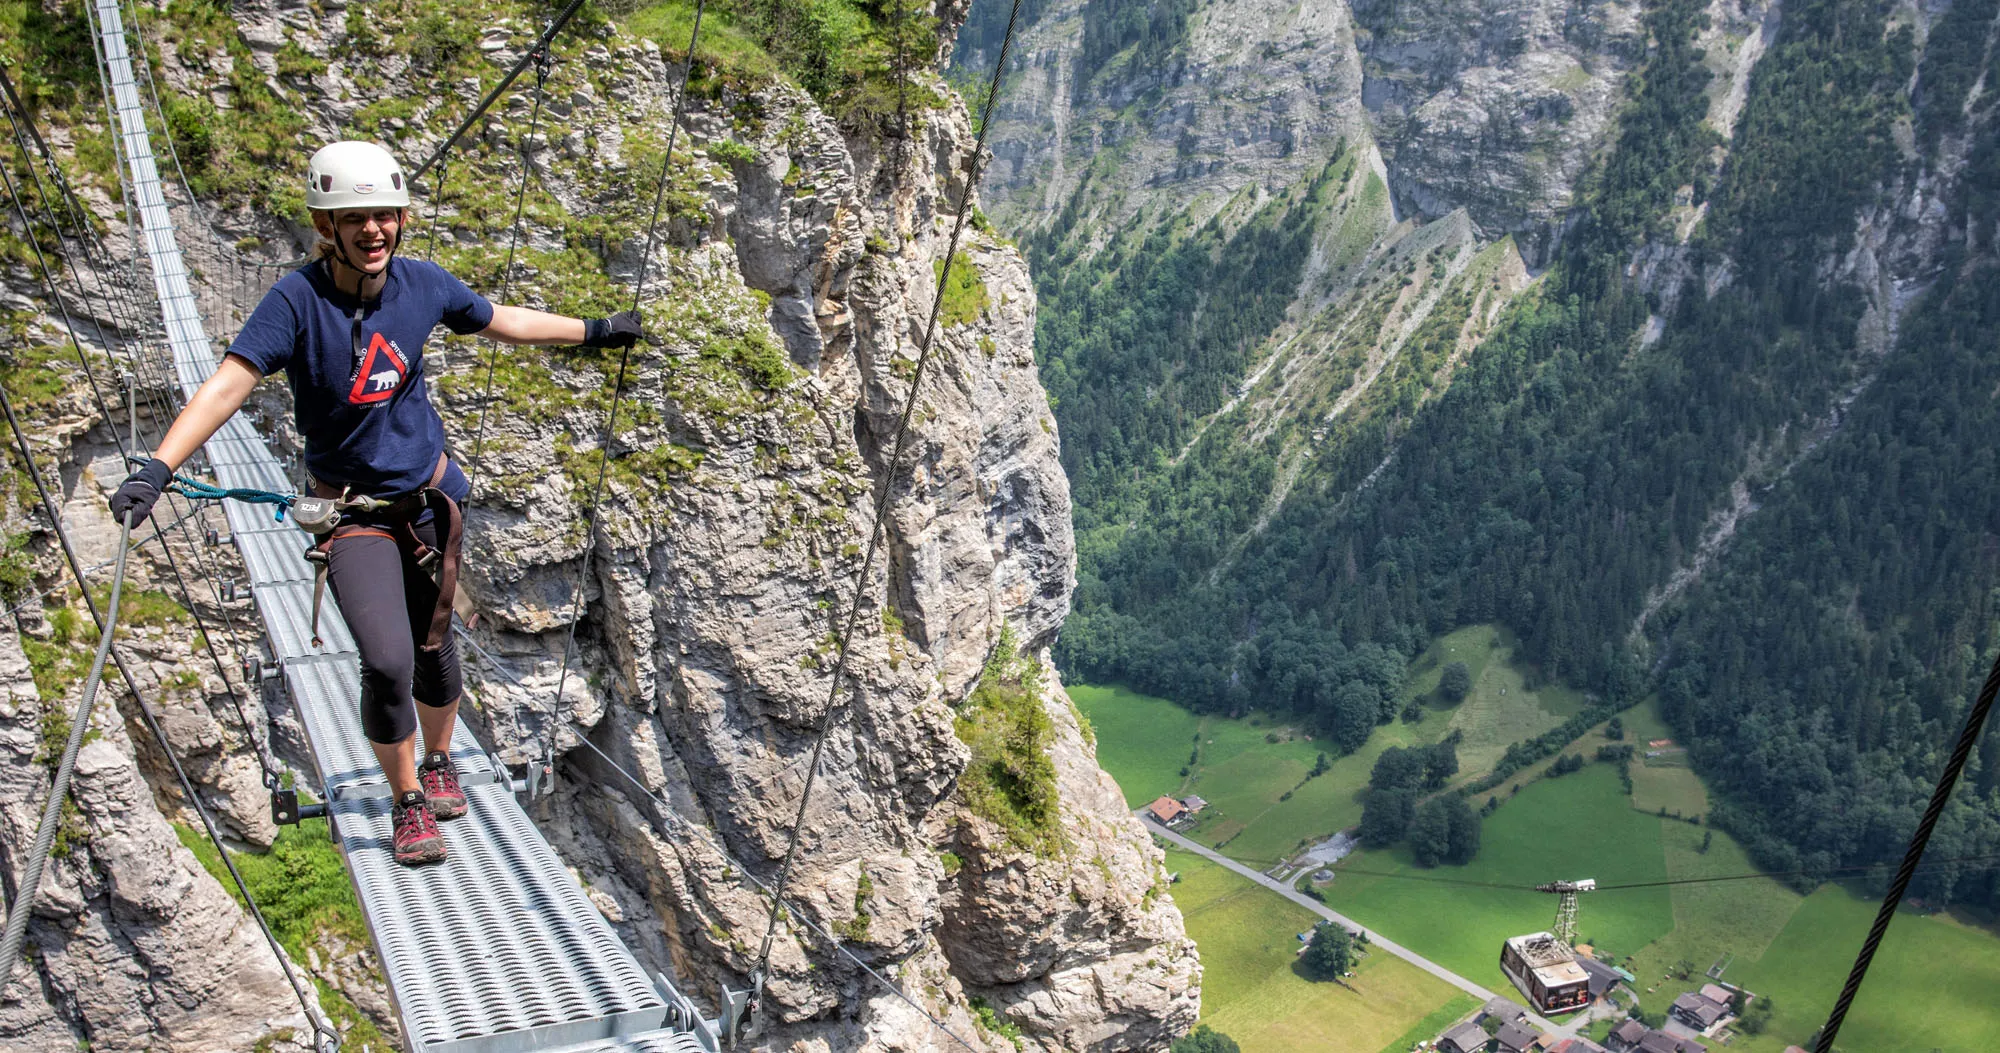 Featured image for “The Mürren Via Ferrata: One of Switzerland’s Most Thrilling Experiences”